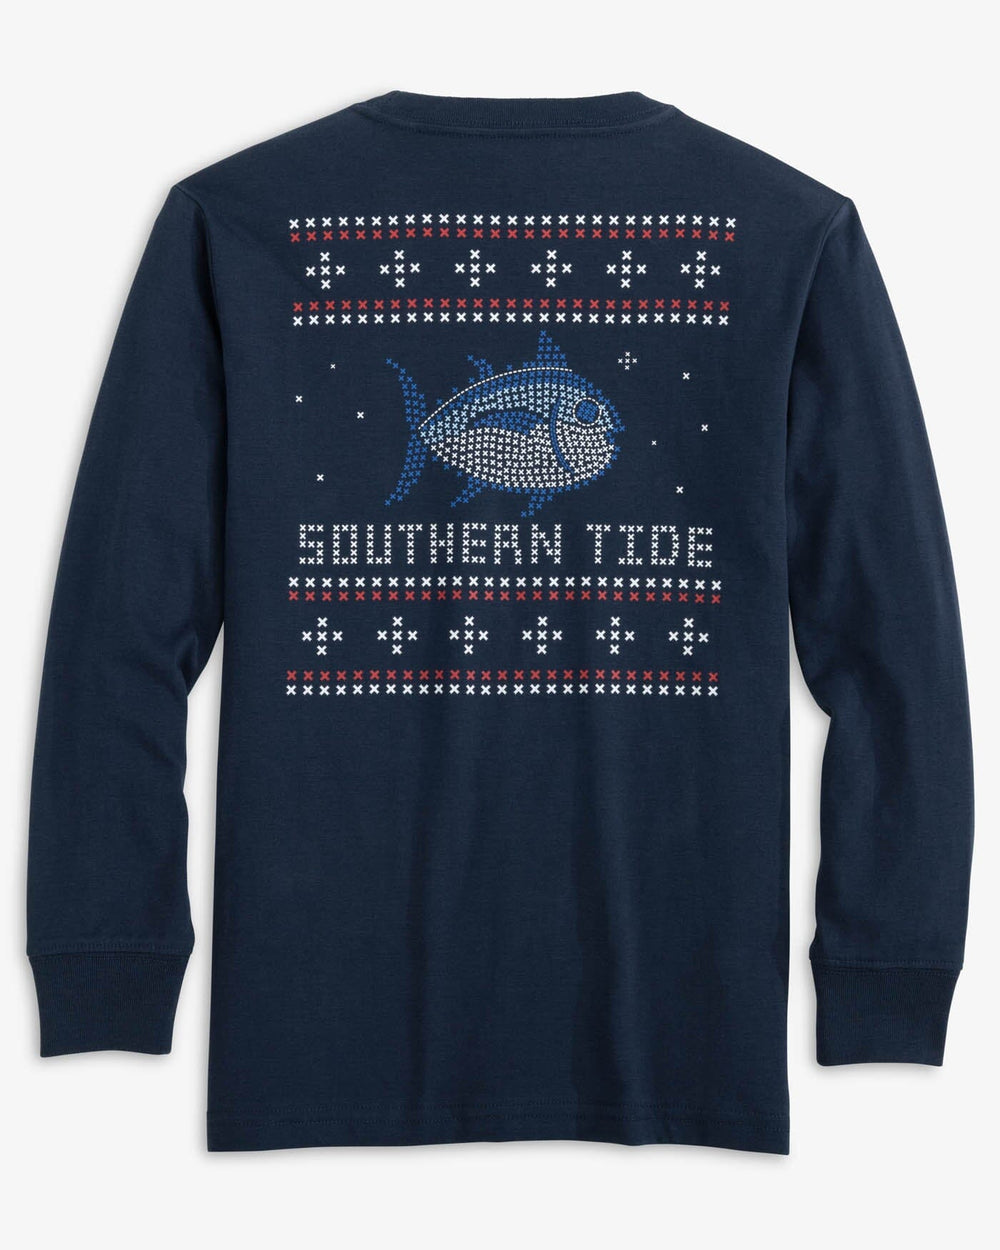 The back view of the Southern Tide Youth Fair Isle Skipjack Long Sleeve T-shirt by Southern Tide - True Navy